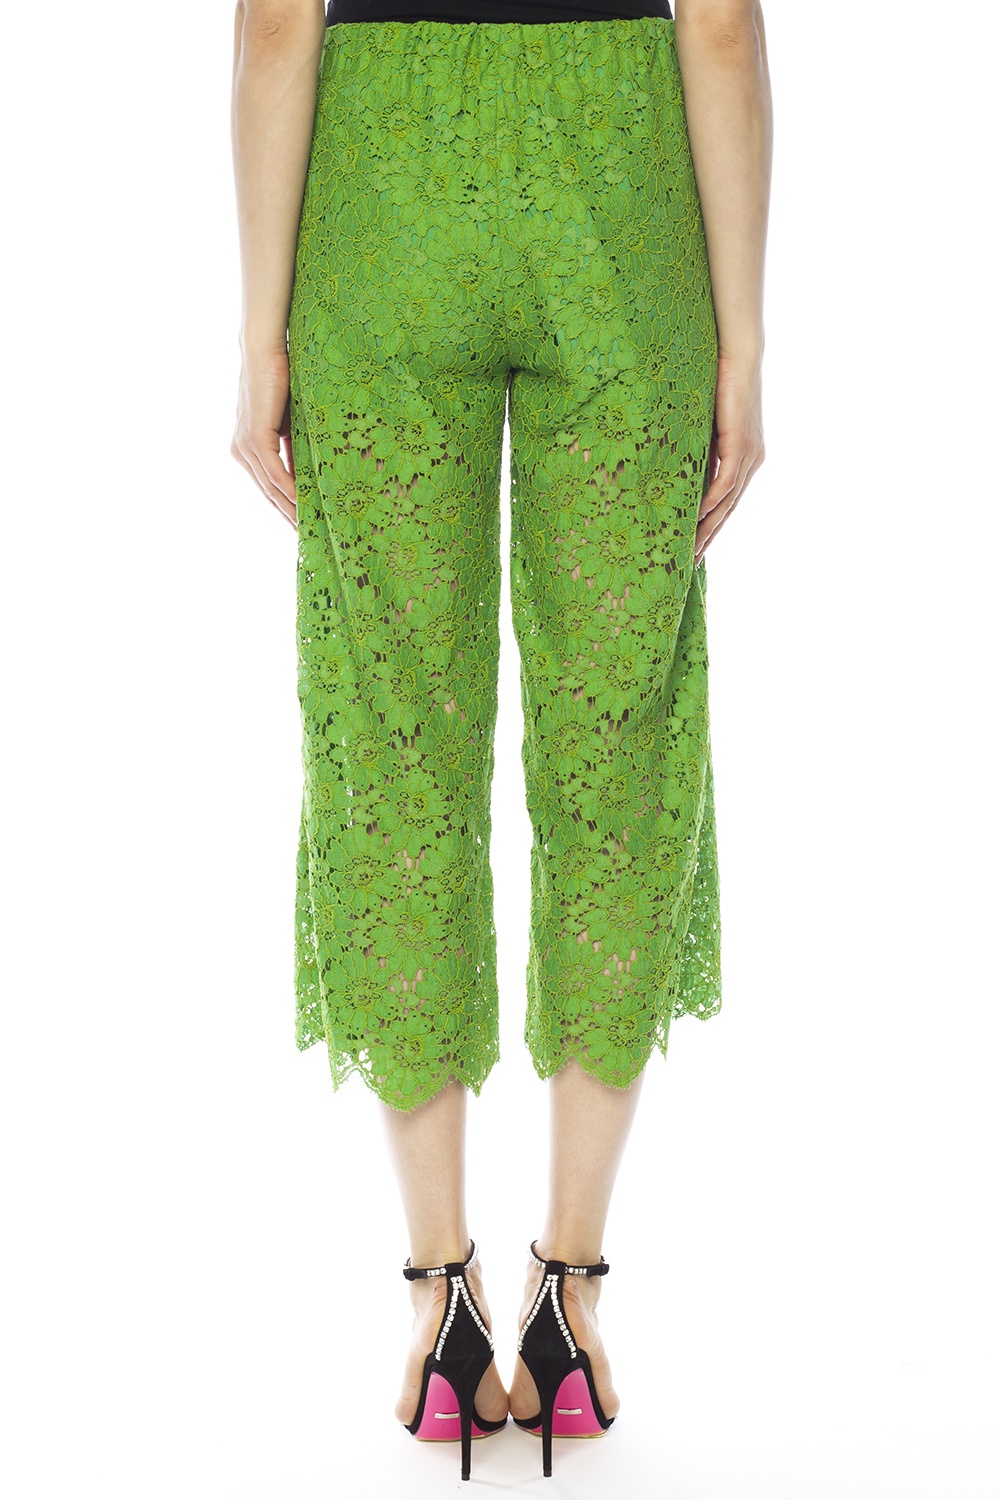 Lime Lace Up Faux Leather Cut Out Flared Trousers  PrettyLittleThing